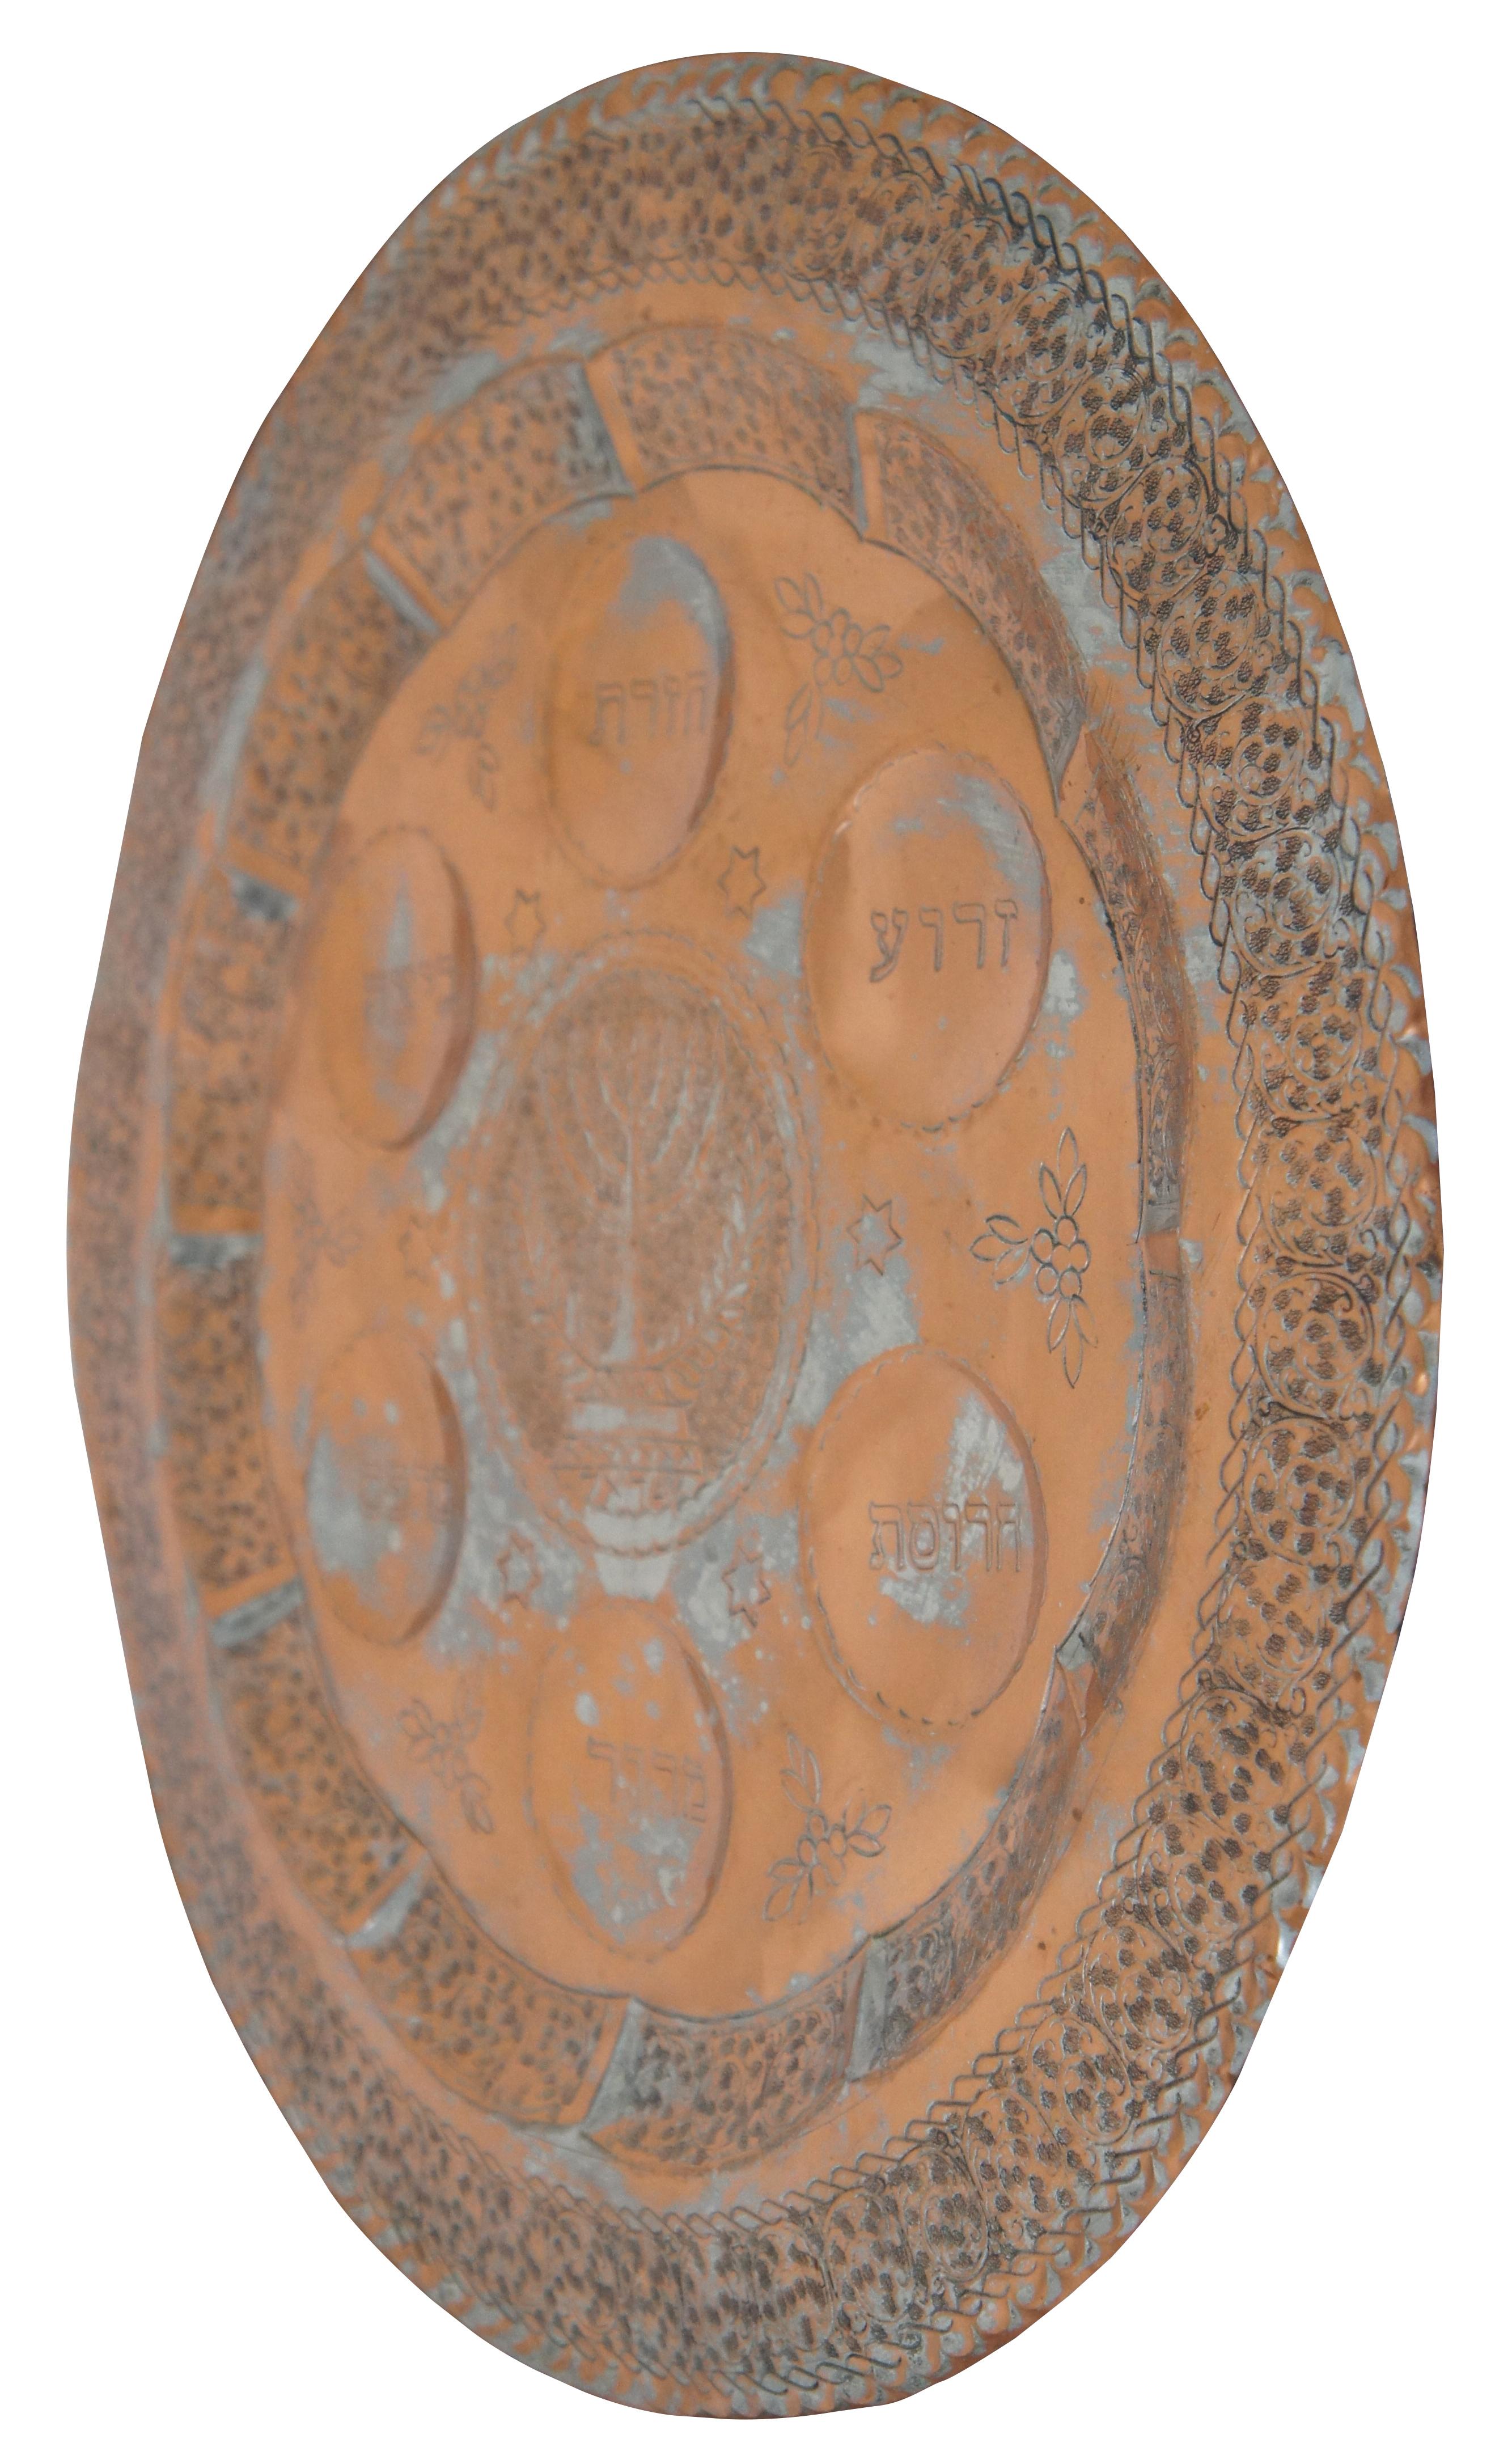 Vintage chased copper plate / platter for the Jewish celebration of the Passover Seder, with attached hook for displaying on the wall. Marked “Handmade in Israel” on hook. Attributed to Messica. Measure: 16